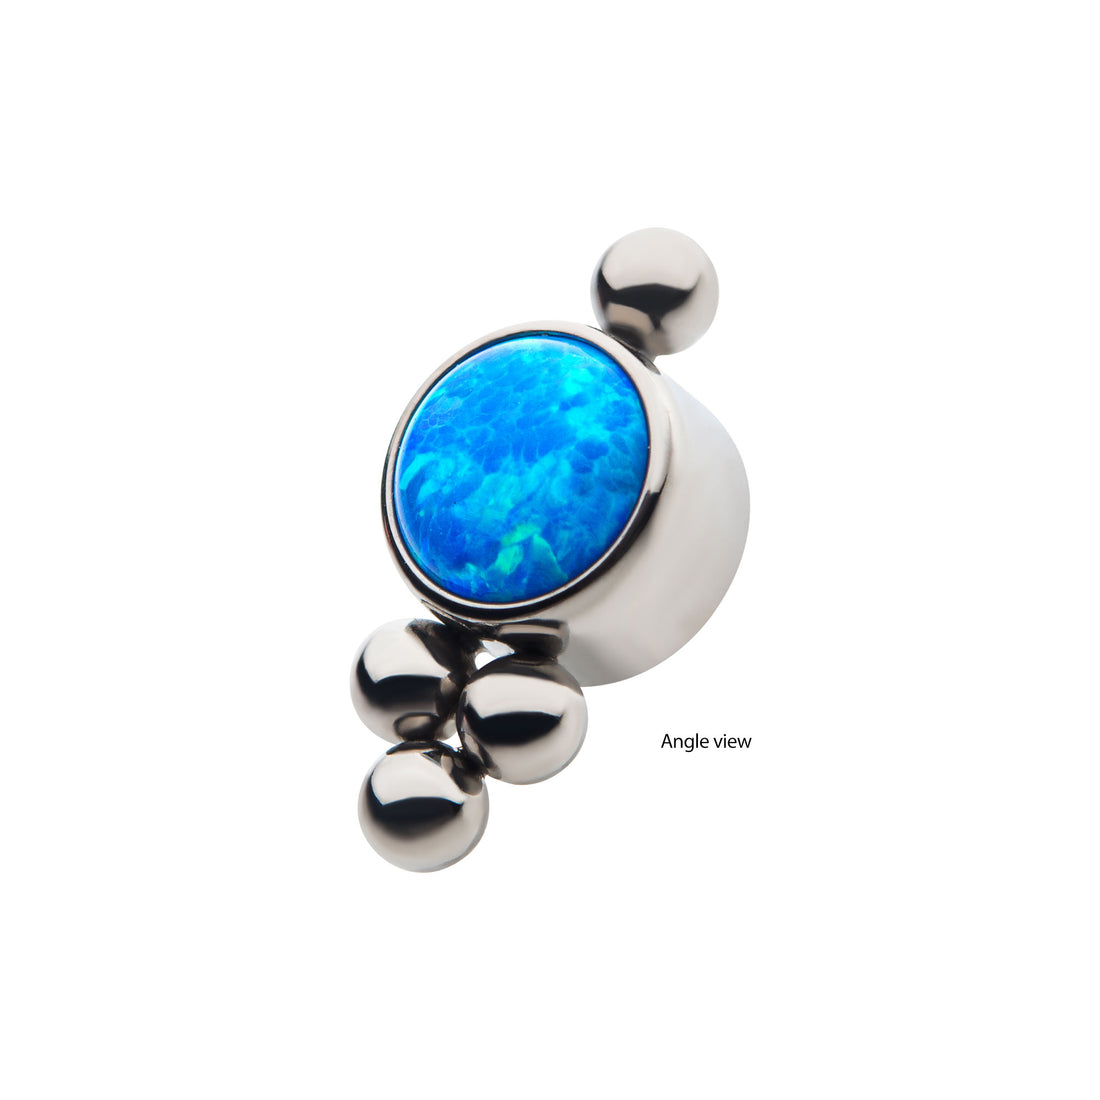 Titanium Internally Threaded with 1pc Bezel Set CZ/Synthetic Opal and 4pcs Beads Top